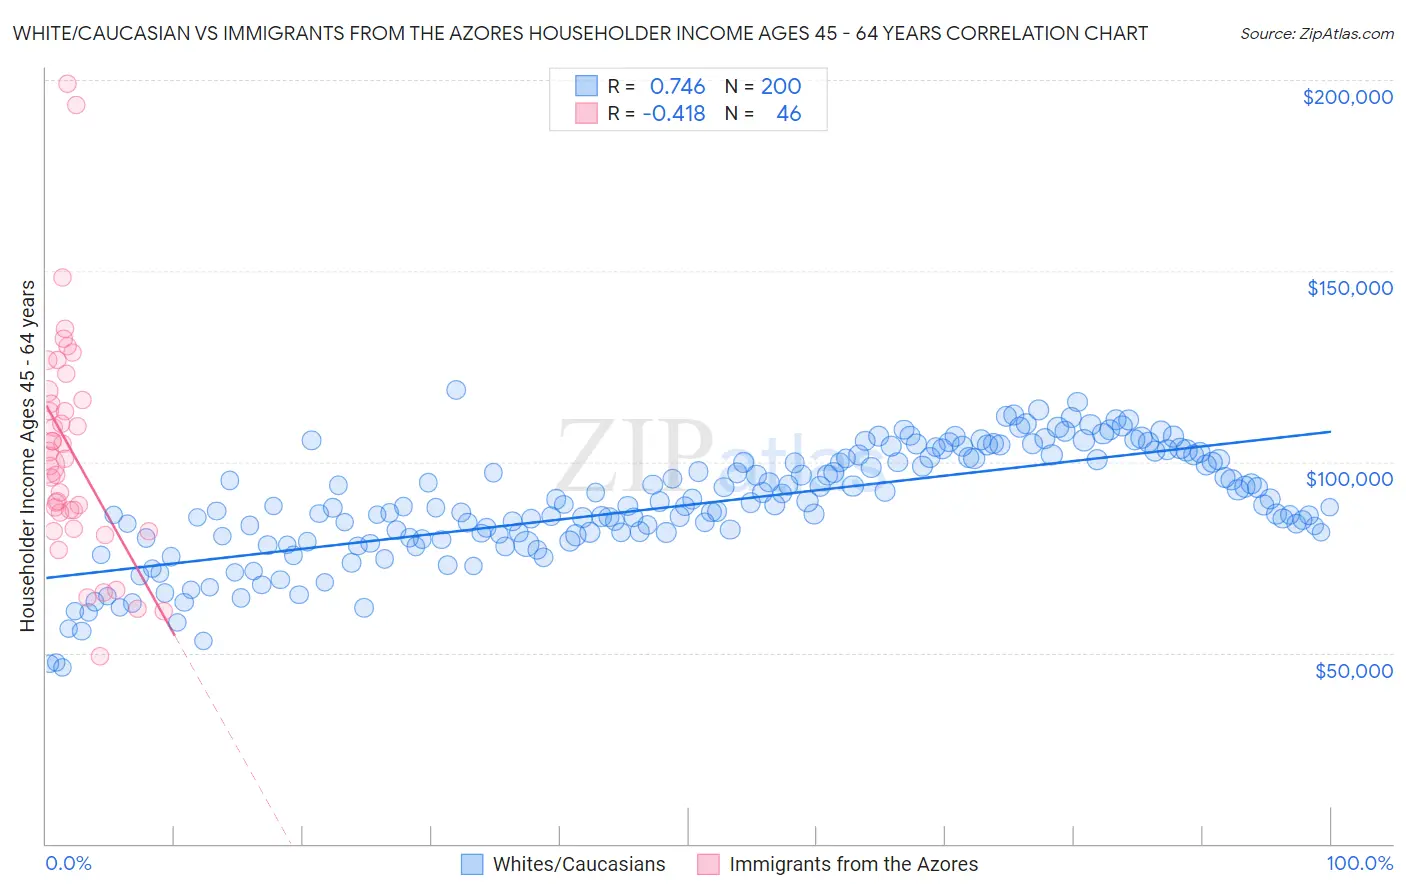 White/Caucasian vs Immigrants from the Azores Householder Income Ages 45 - 64 years